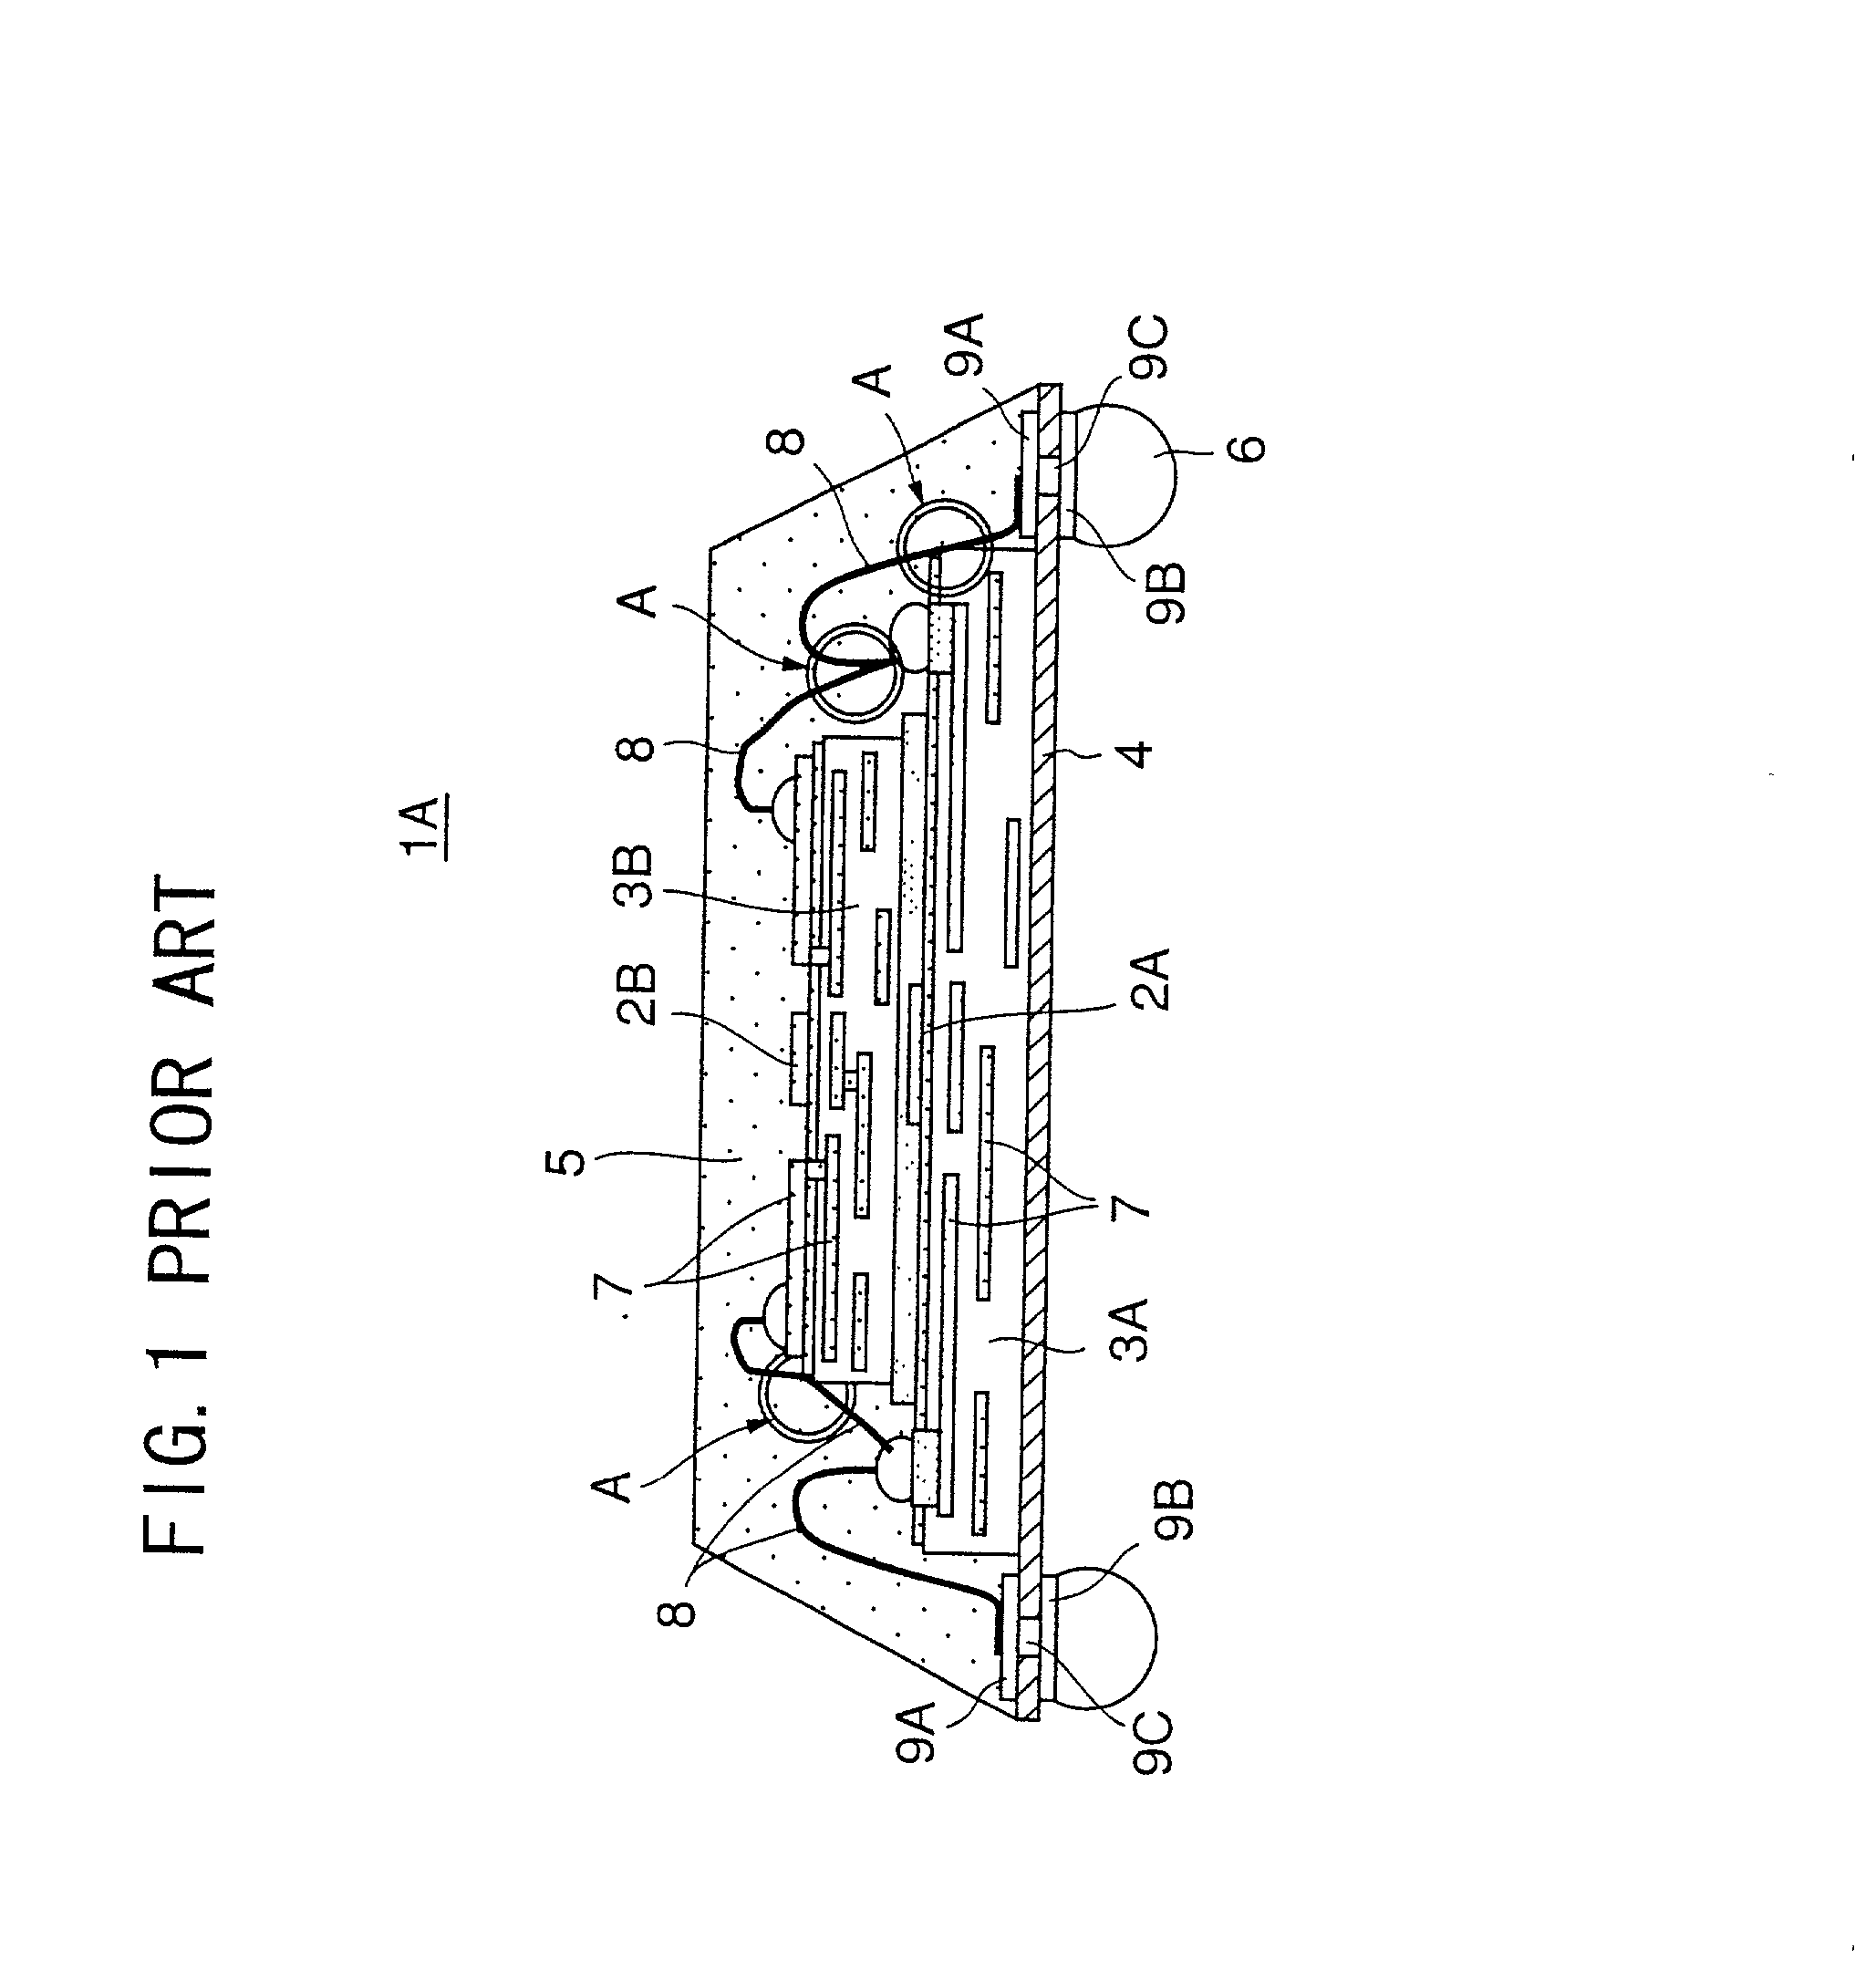 Semiconductor device having an organic material layer and method for making the same